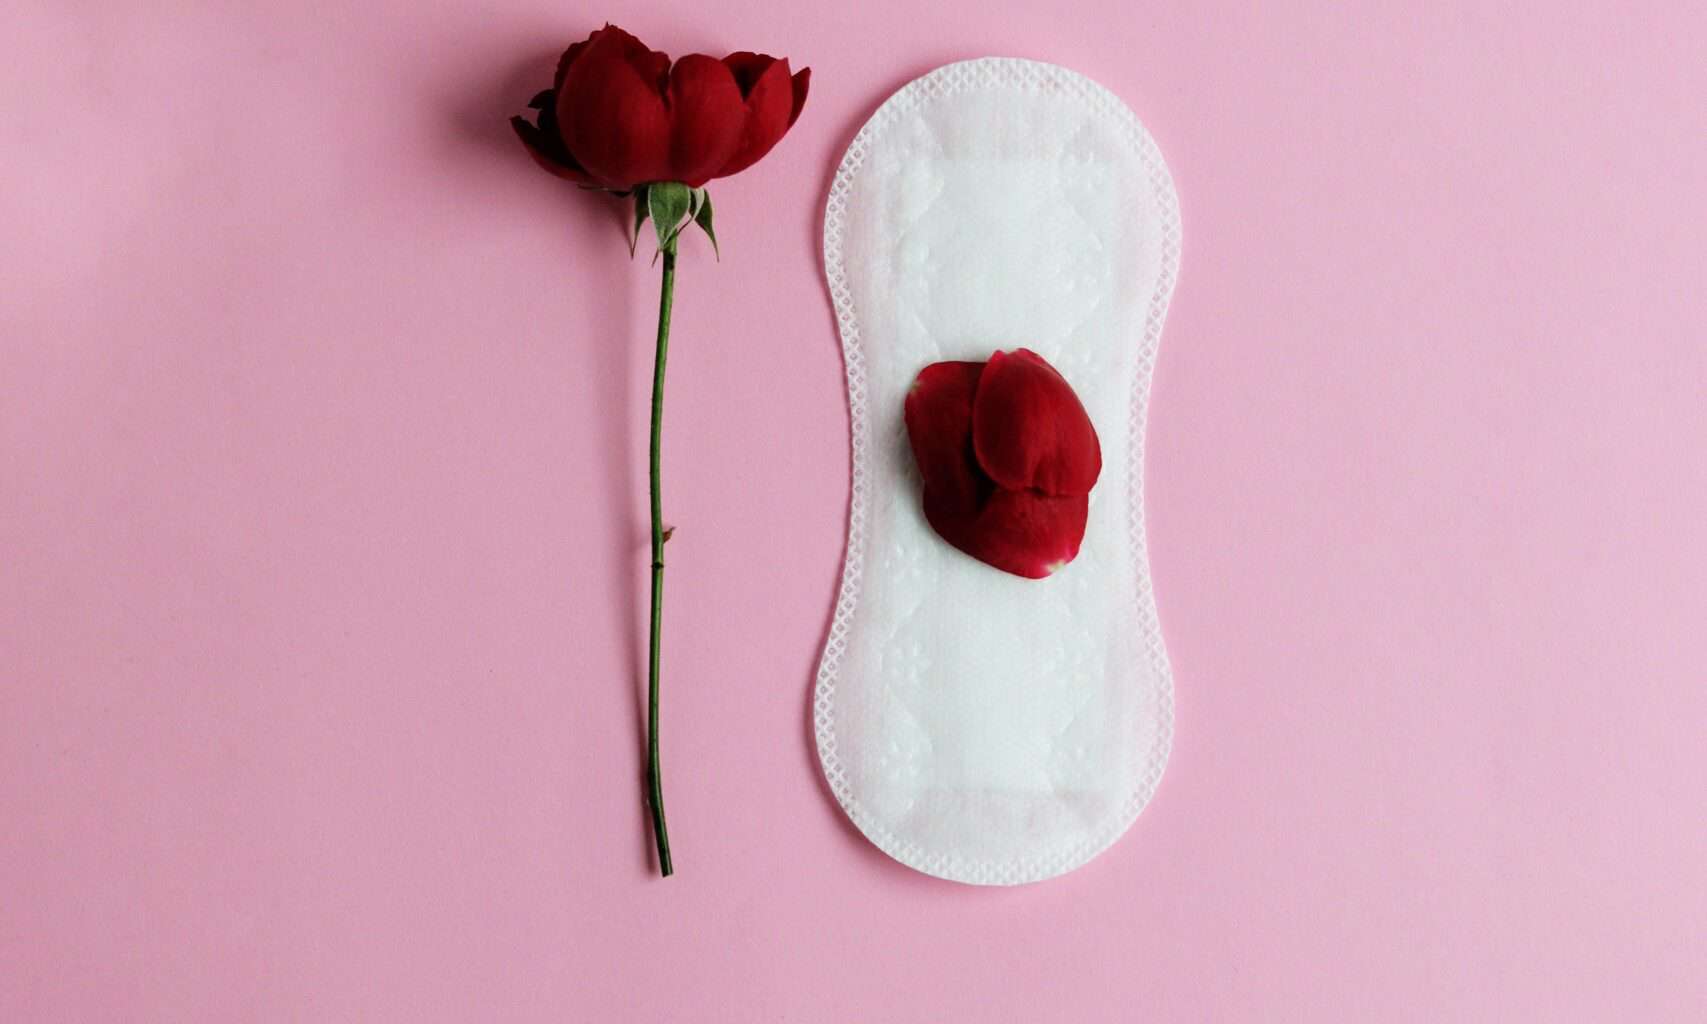 Pad and rose on a pink background